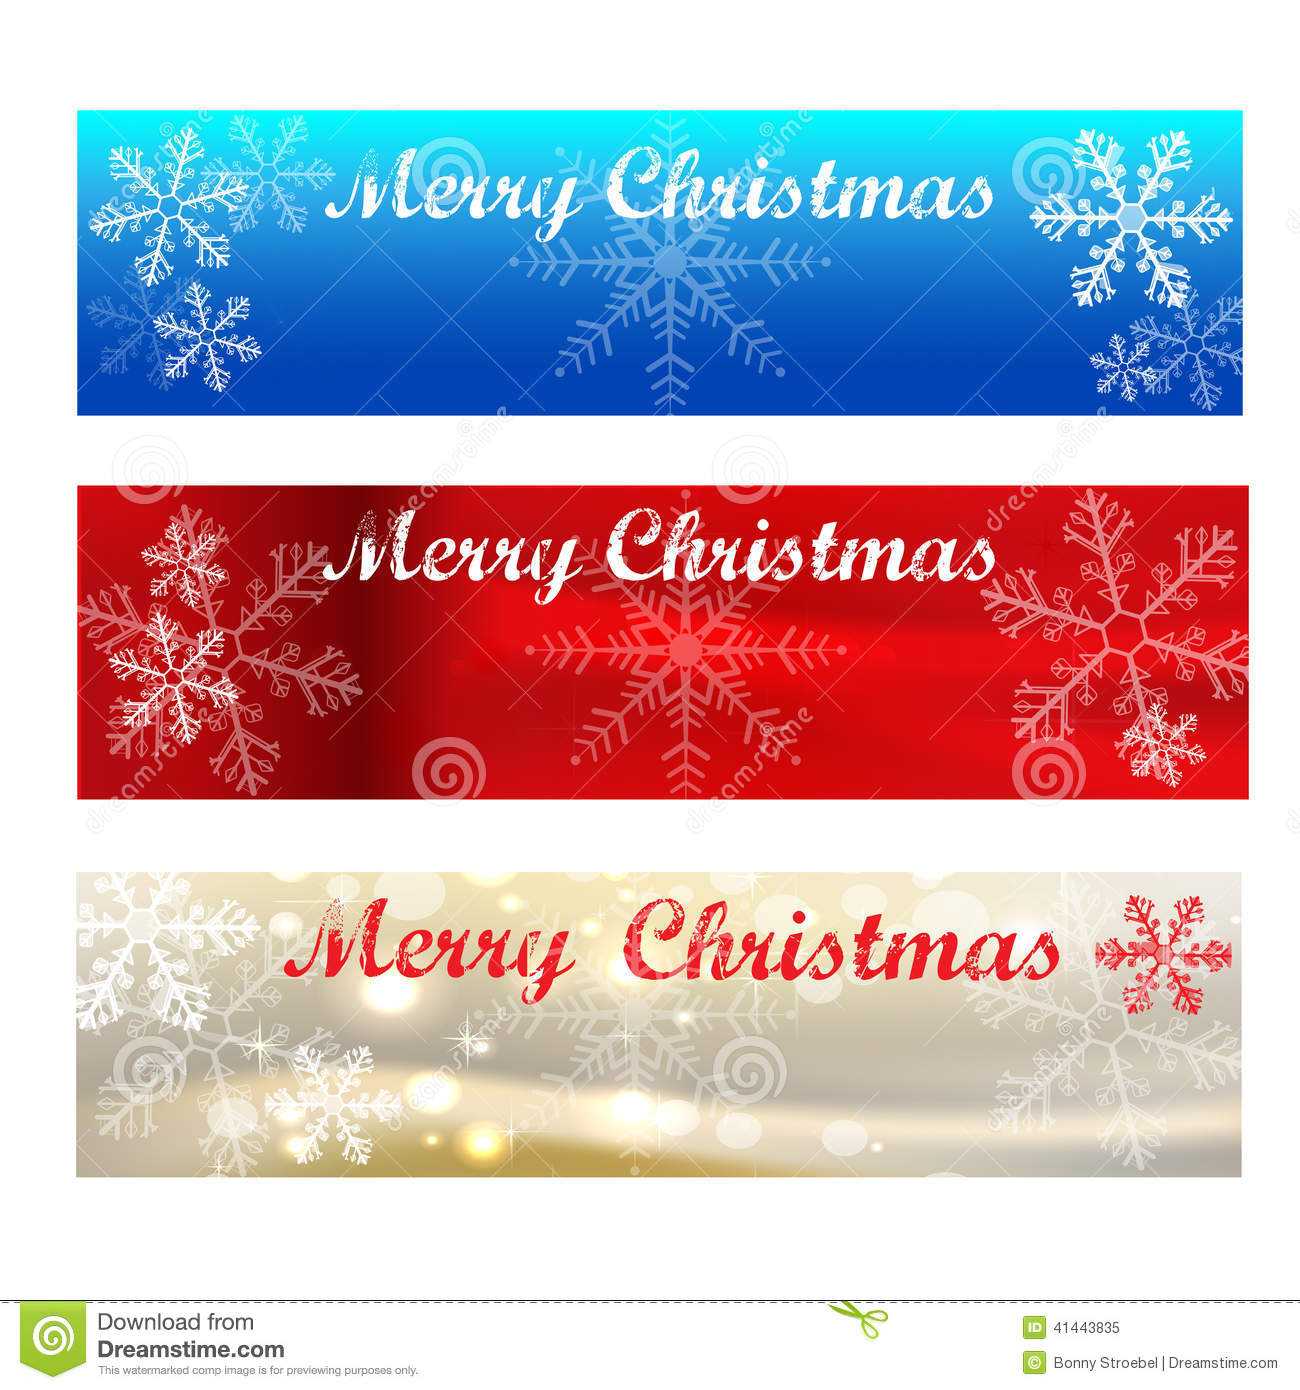 Merry Christmas Banners Colour Samples Stock Vector With Merry Christmas Banner Template